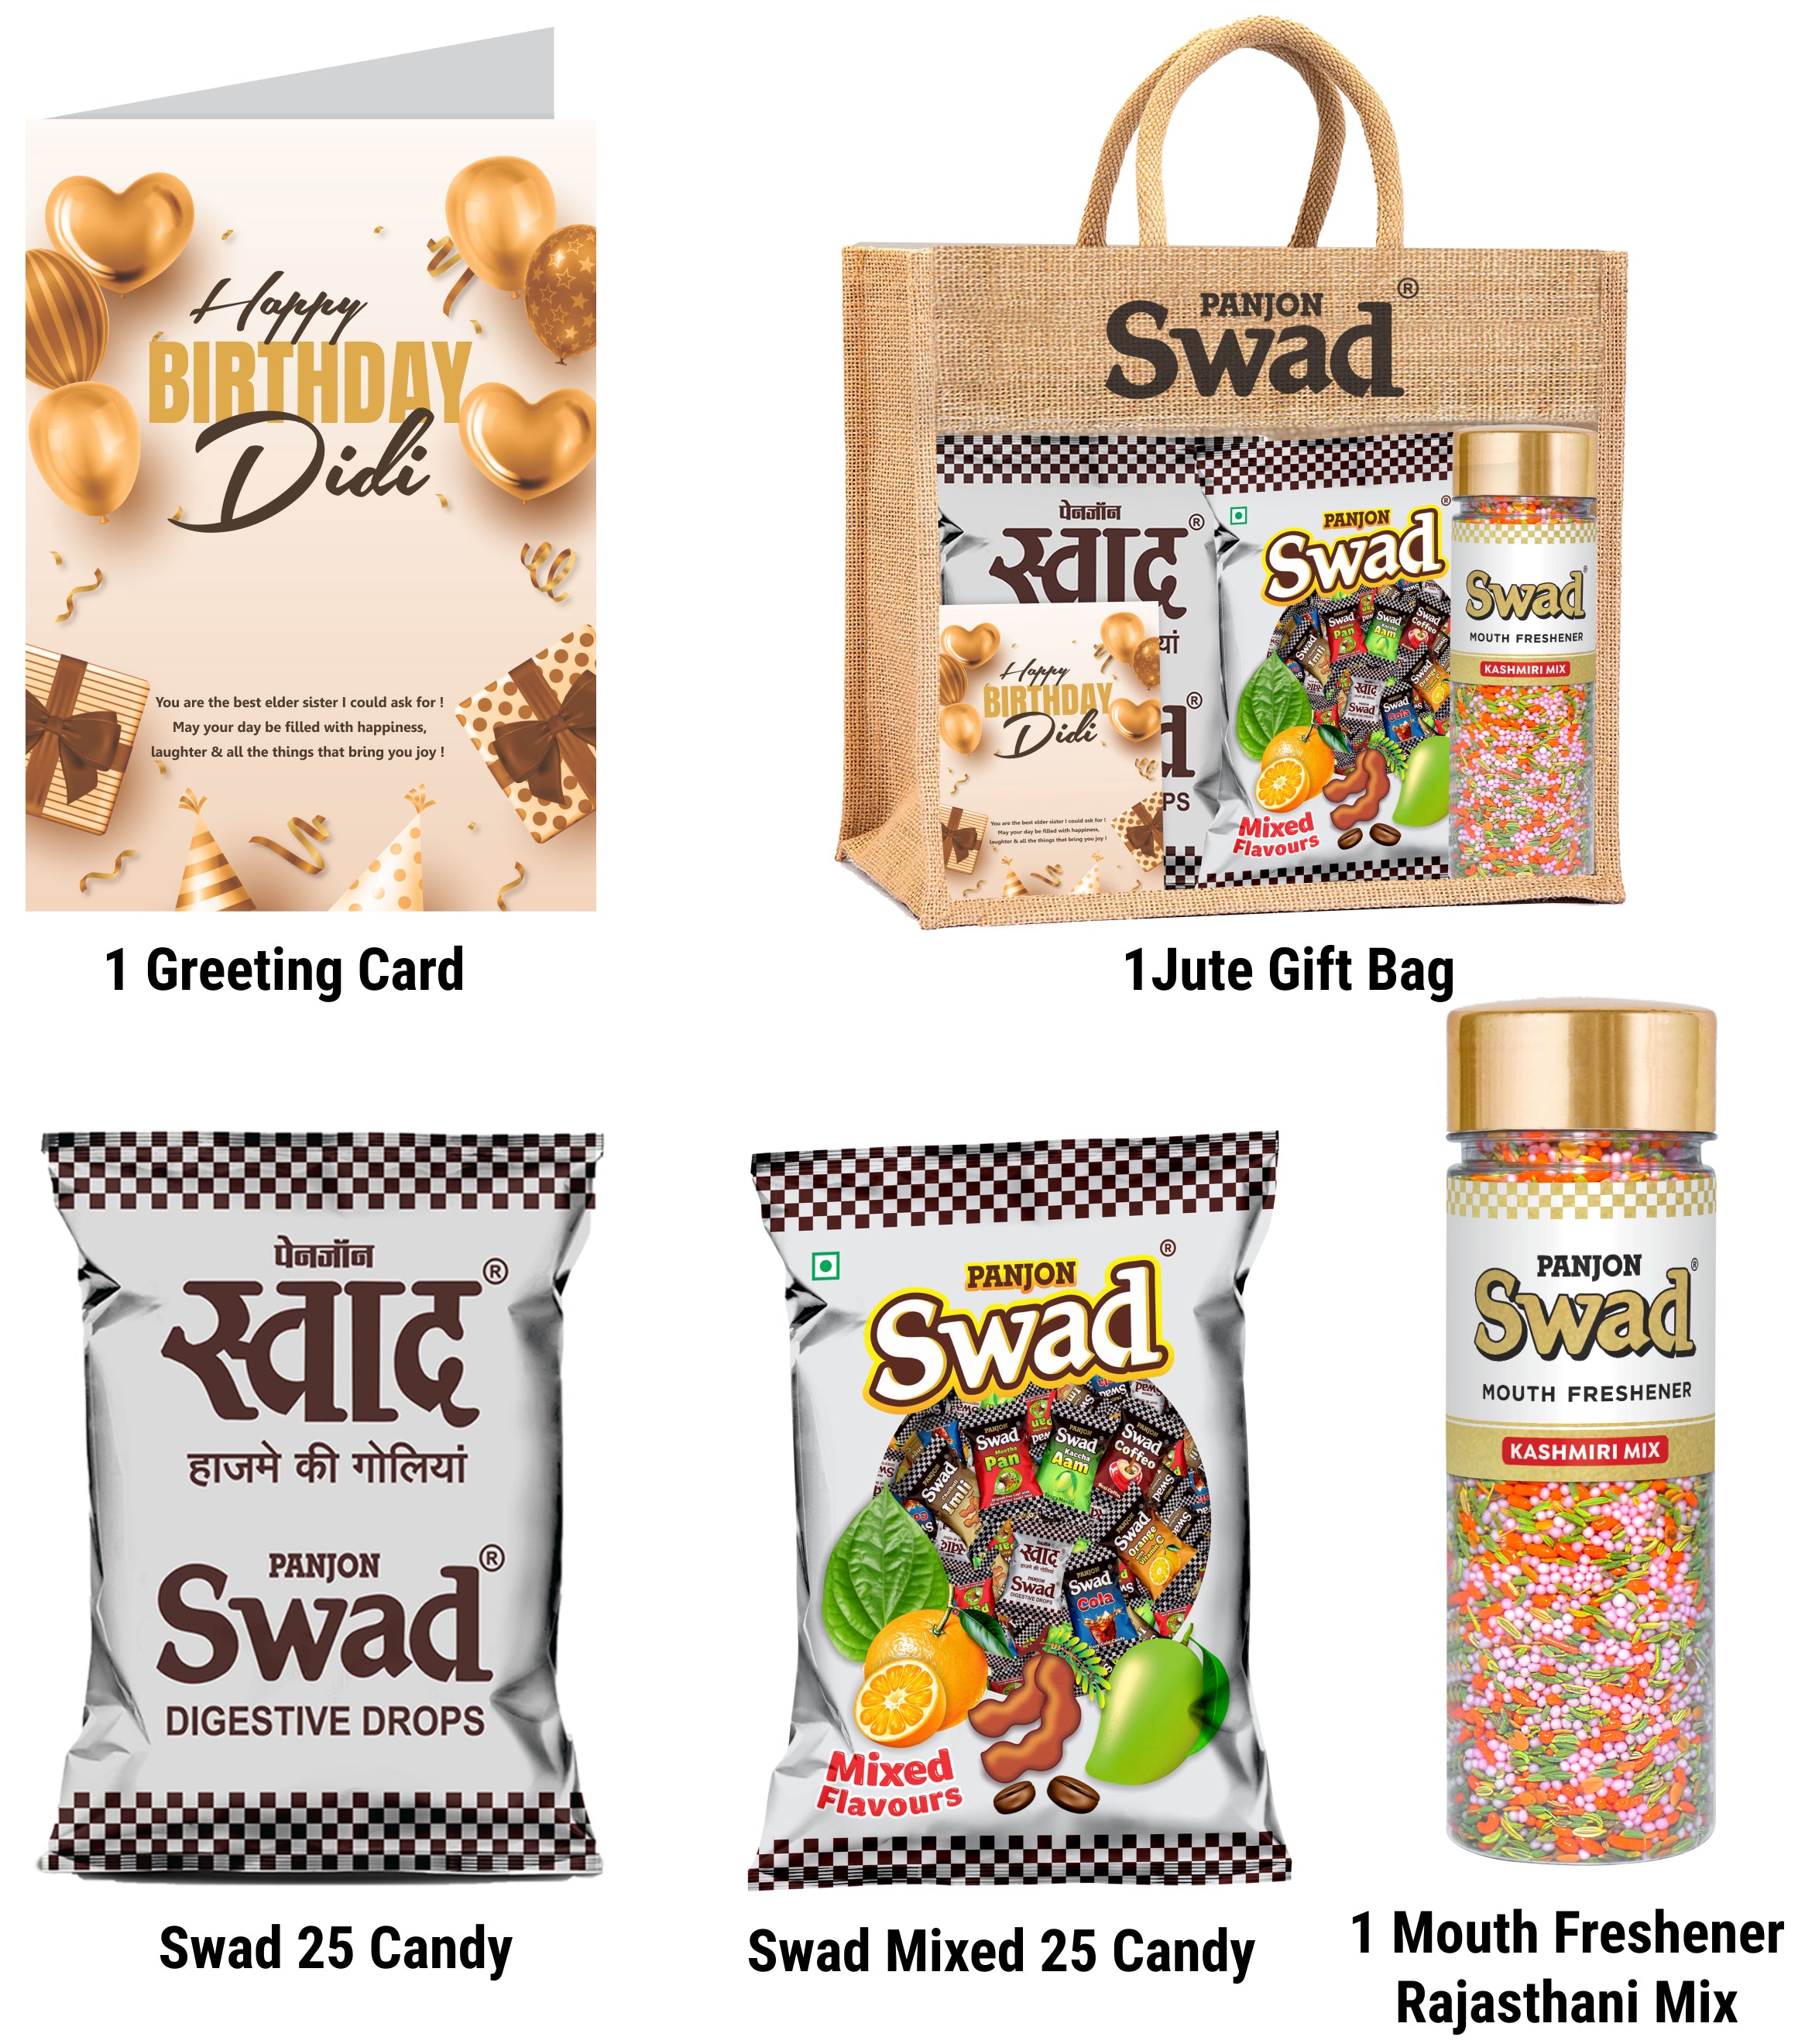 Swad Happy Birthday Didi Elder sister Gift with Card (25 Swad Candy, 25 Mixed Toffee, Kashmiri Mix Mukhwas) in Jute Bag